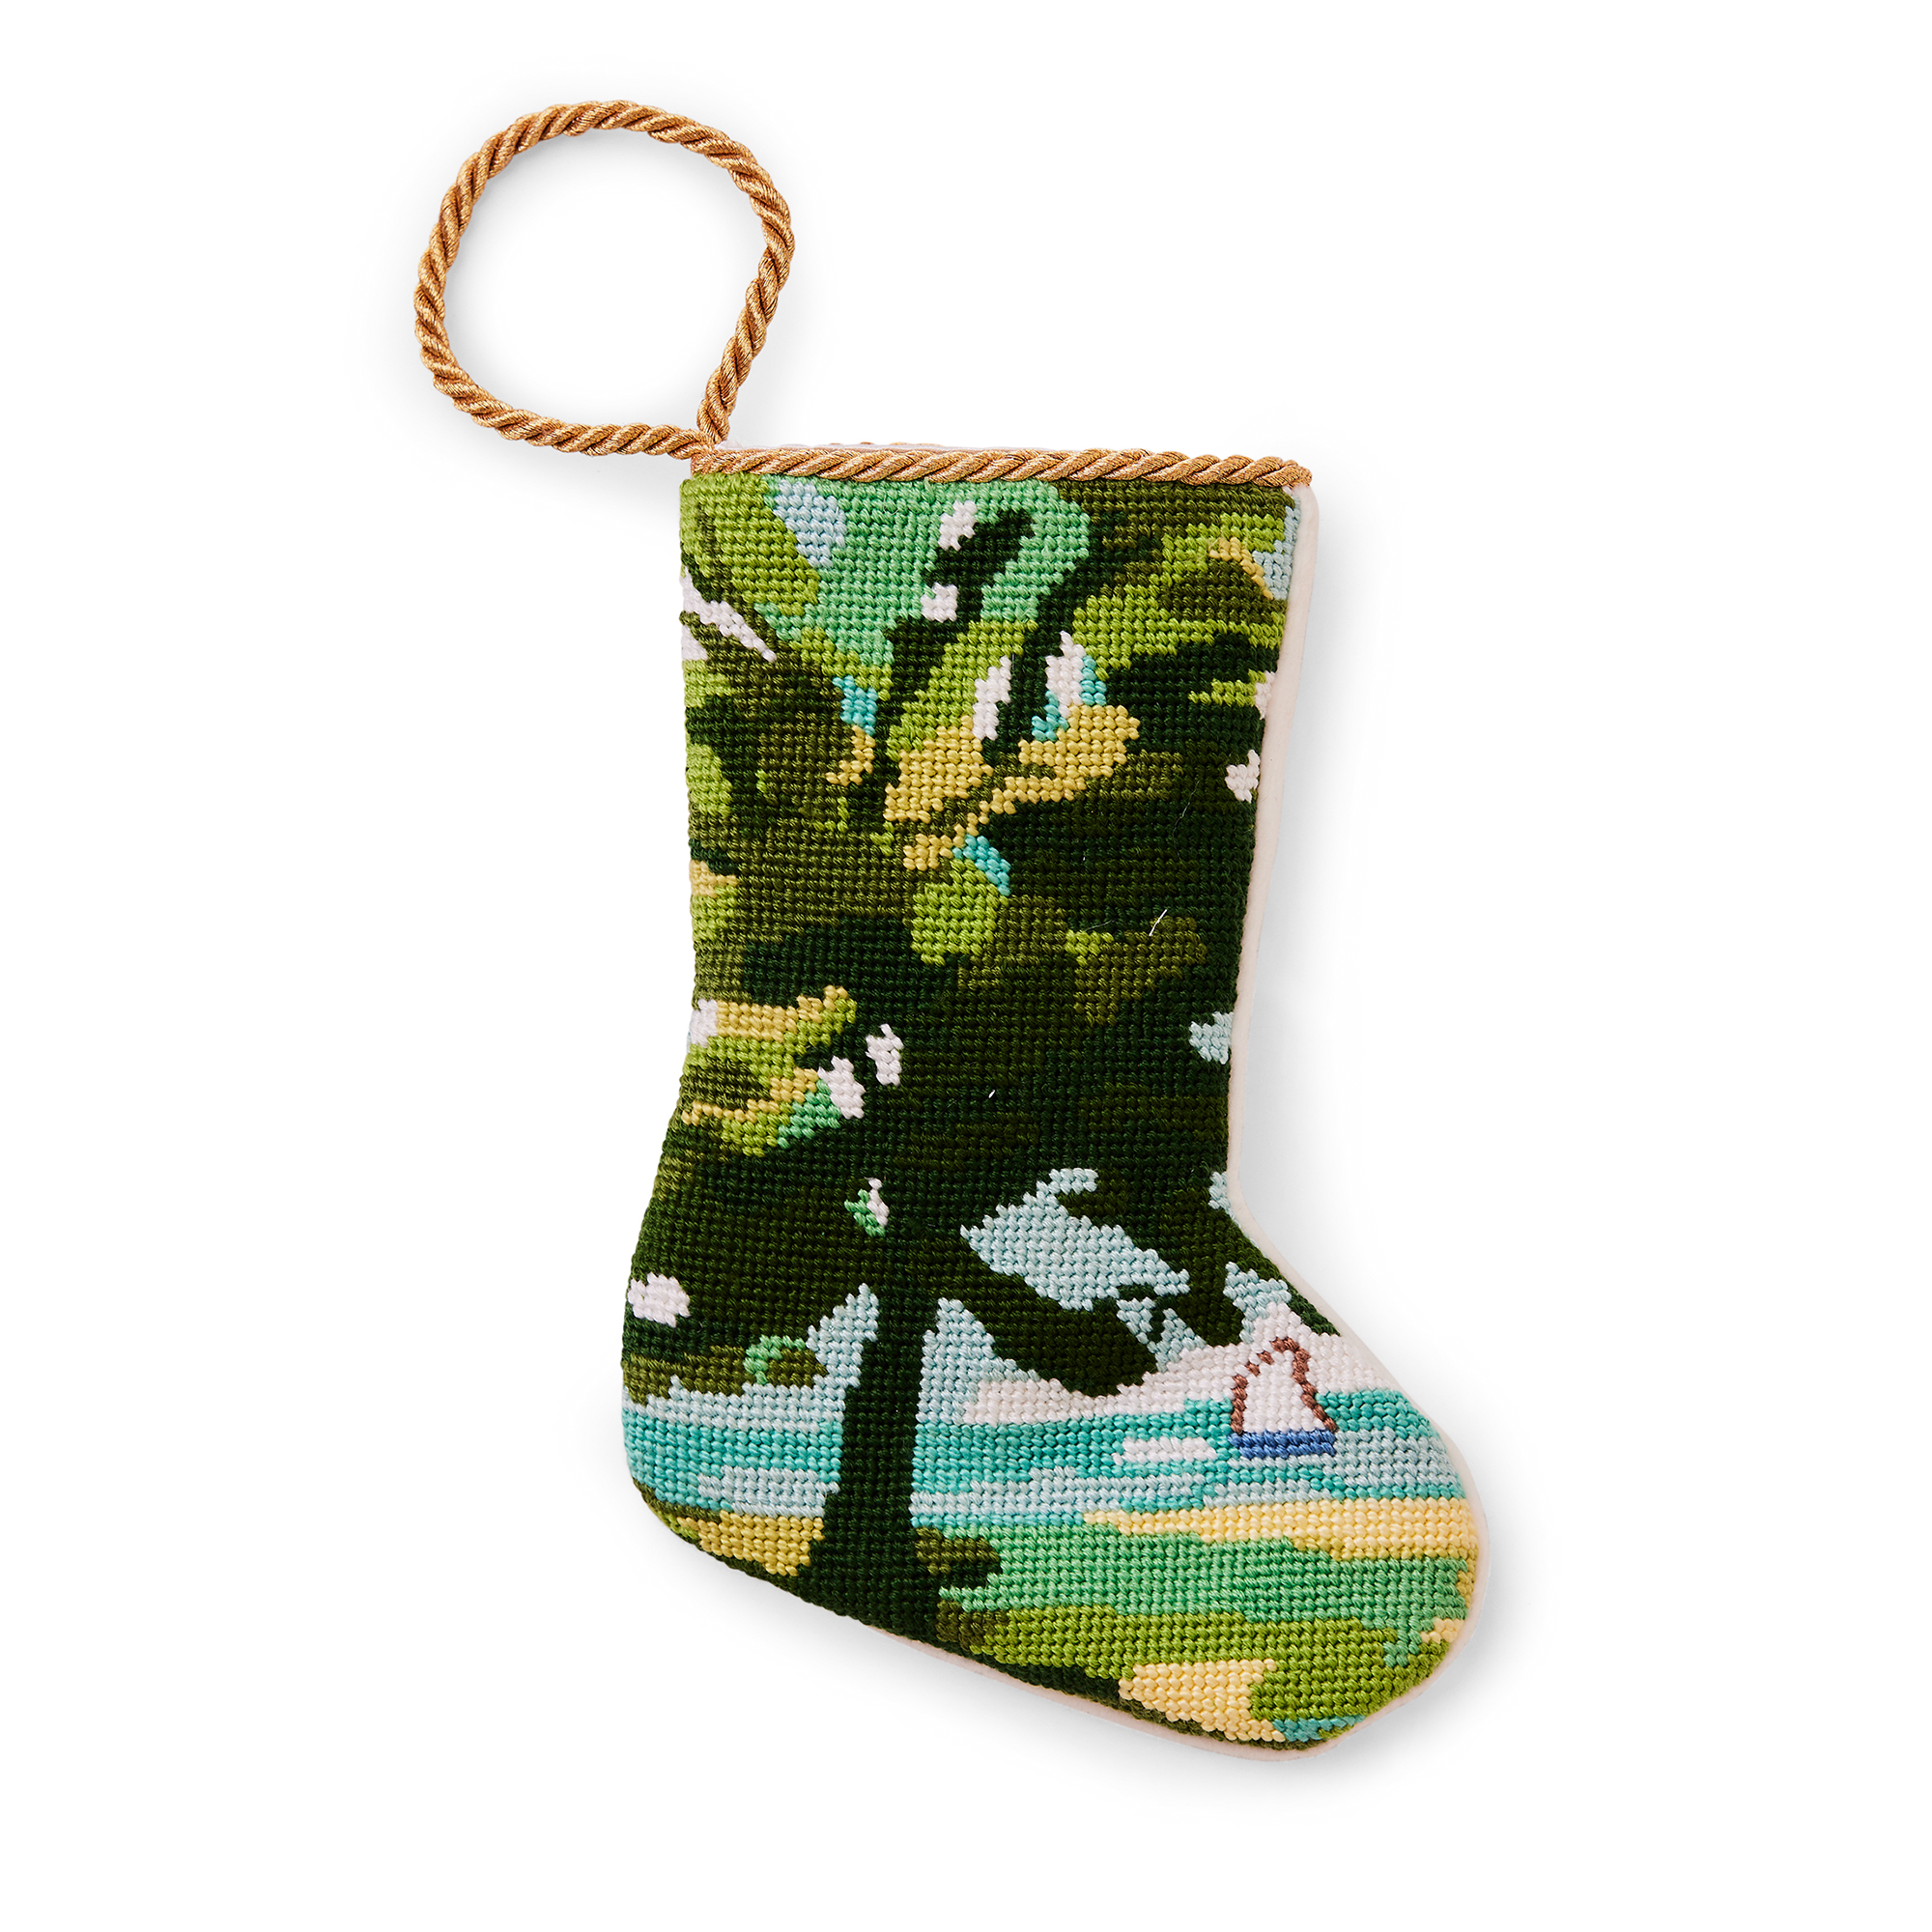 A small, intricately designed needlepoint stocking featuring a scene with tree and a sailboat on the sea in the distance. The background depicts a bright, summery setting. A gold loop at the top makes it perfect as a tree ornament, place setting, or for hanging by the fireplace.